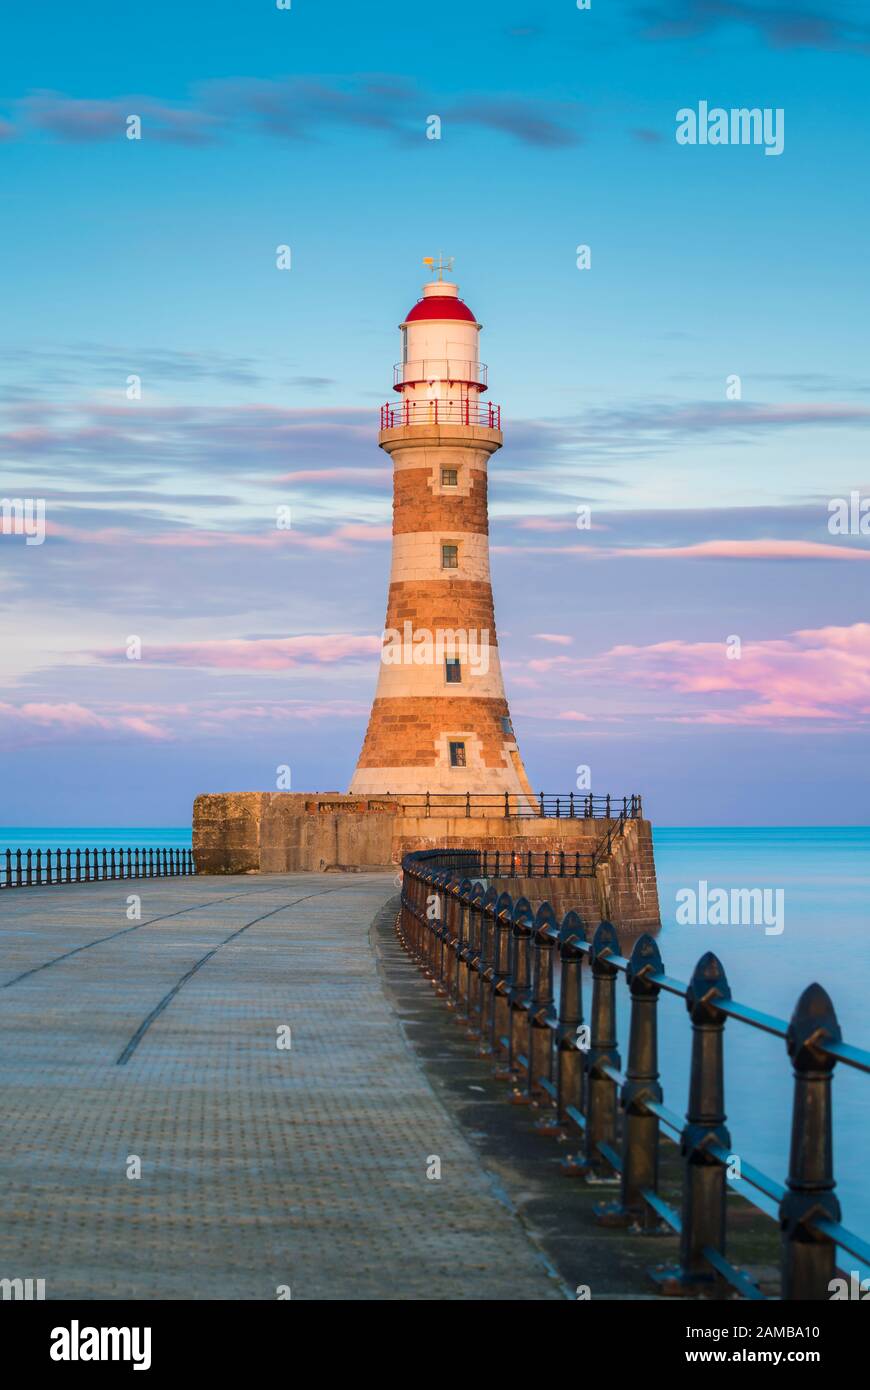 A wonderful pastel palette of sunset colours at Roker Pier, Sunderland, the railings leading to the lighthouse which stands proudly in the North Sea. Stock Photo